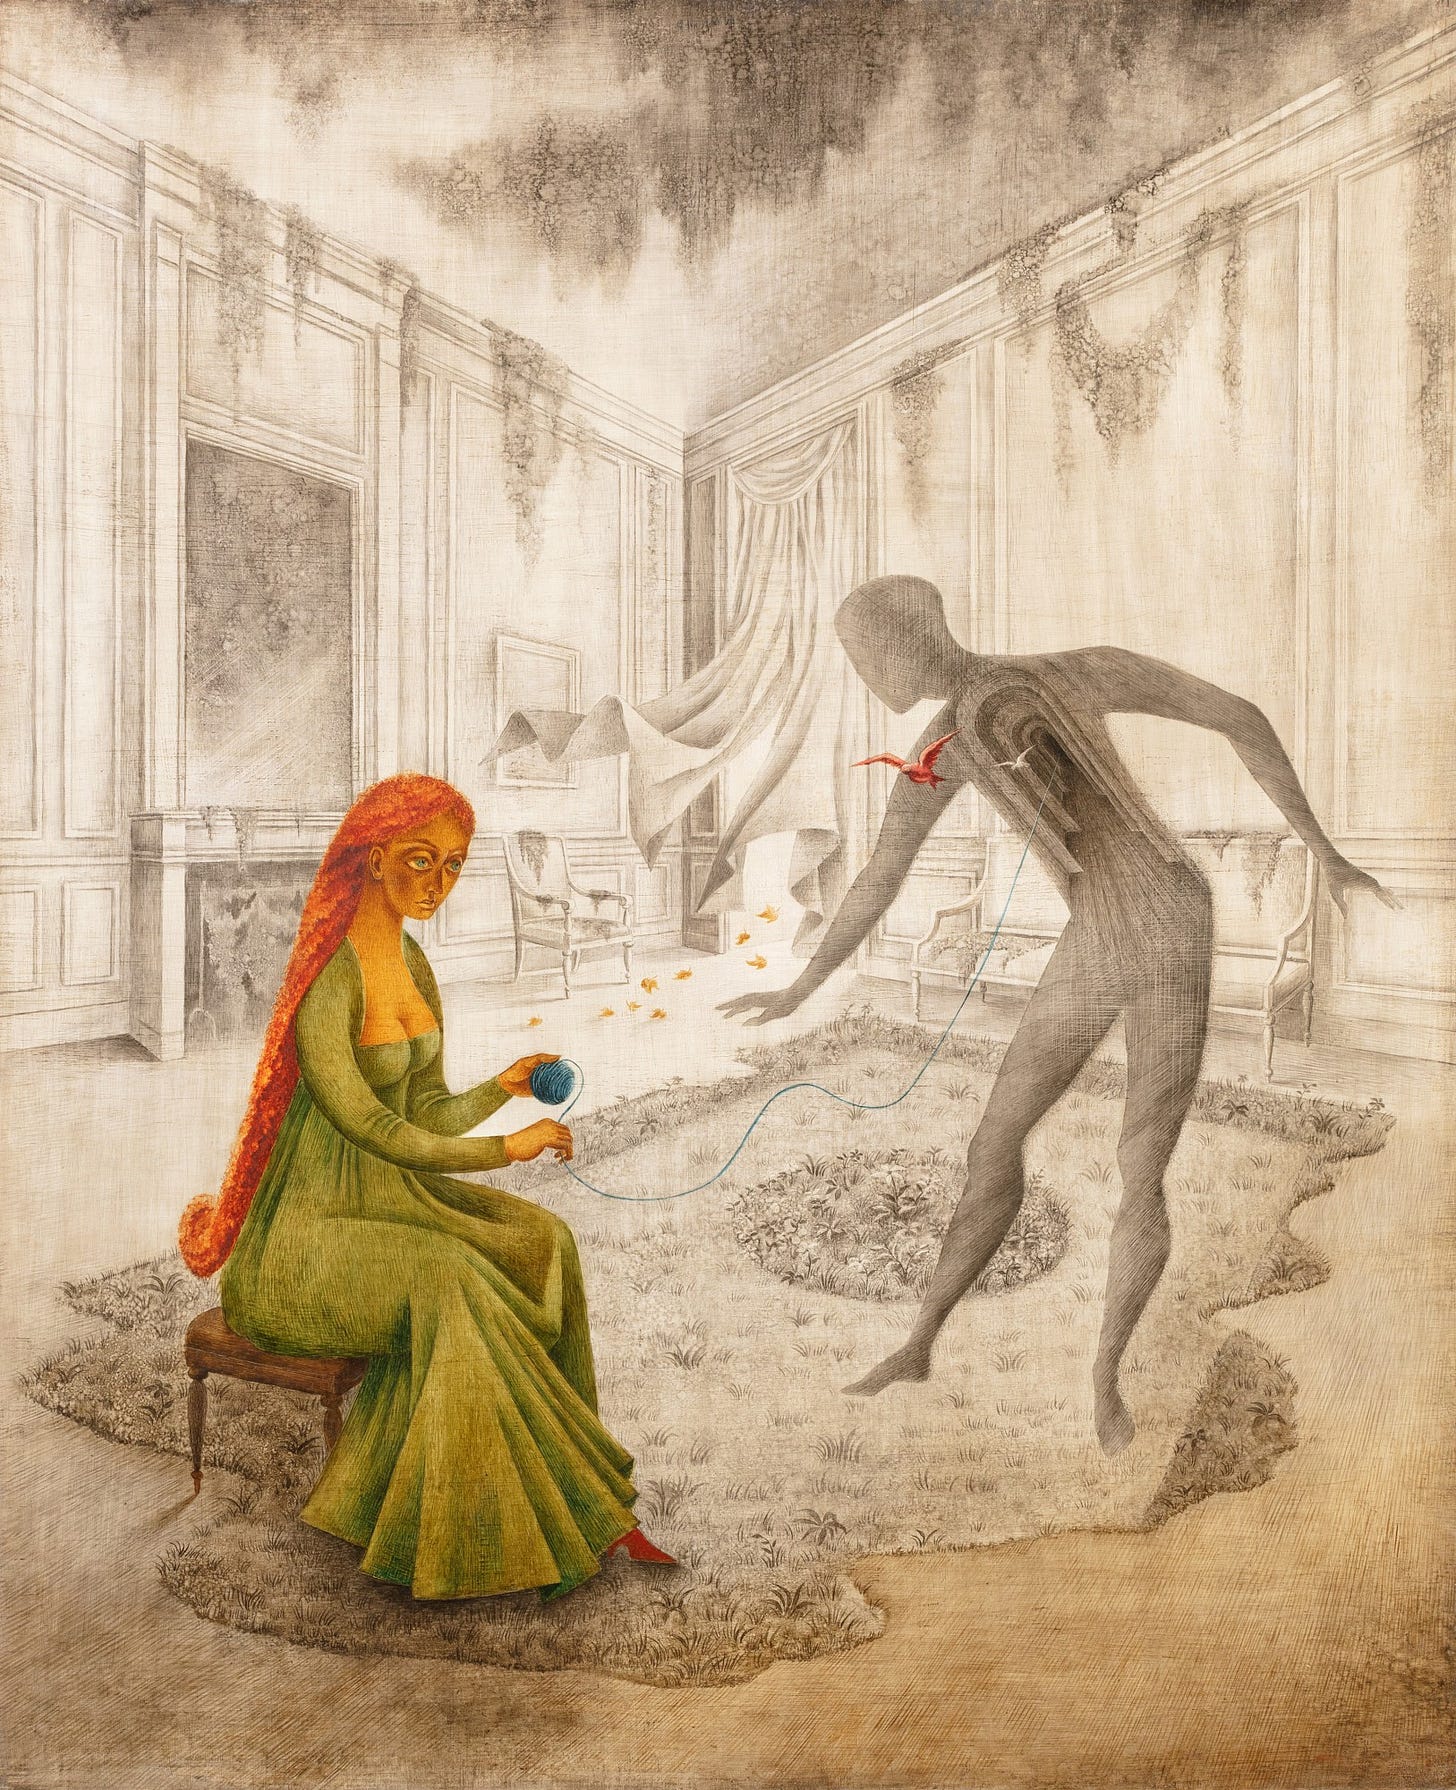 Remedios Varo | Paintings, Biography & Art for Sale | Sotheby's